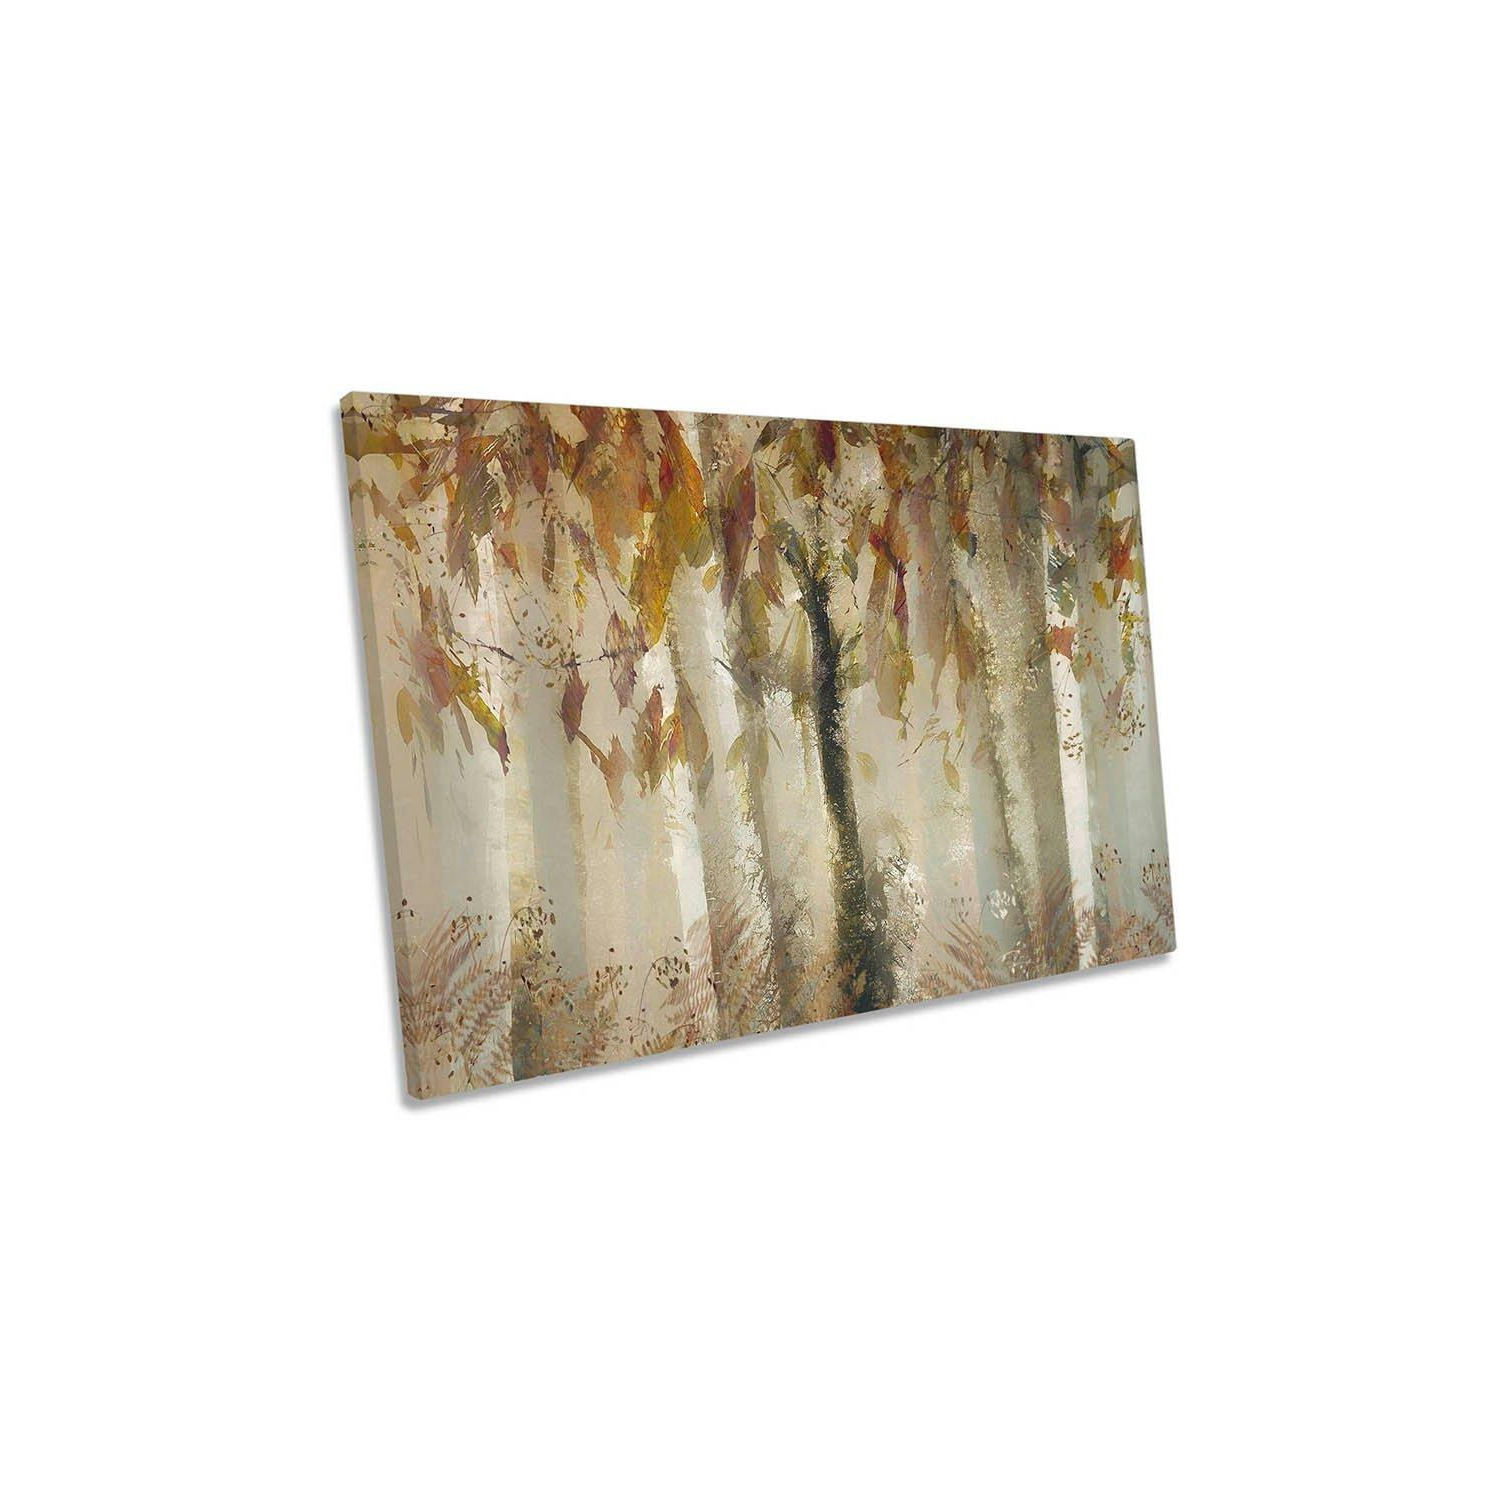 Eye Catcher Textured Floral Trees Canvas Wall Art Picture Print - image 1